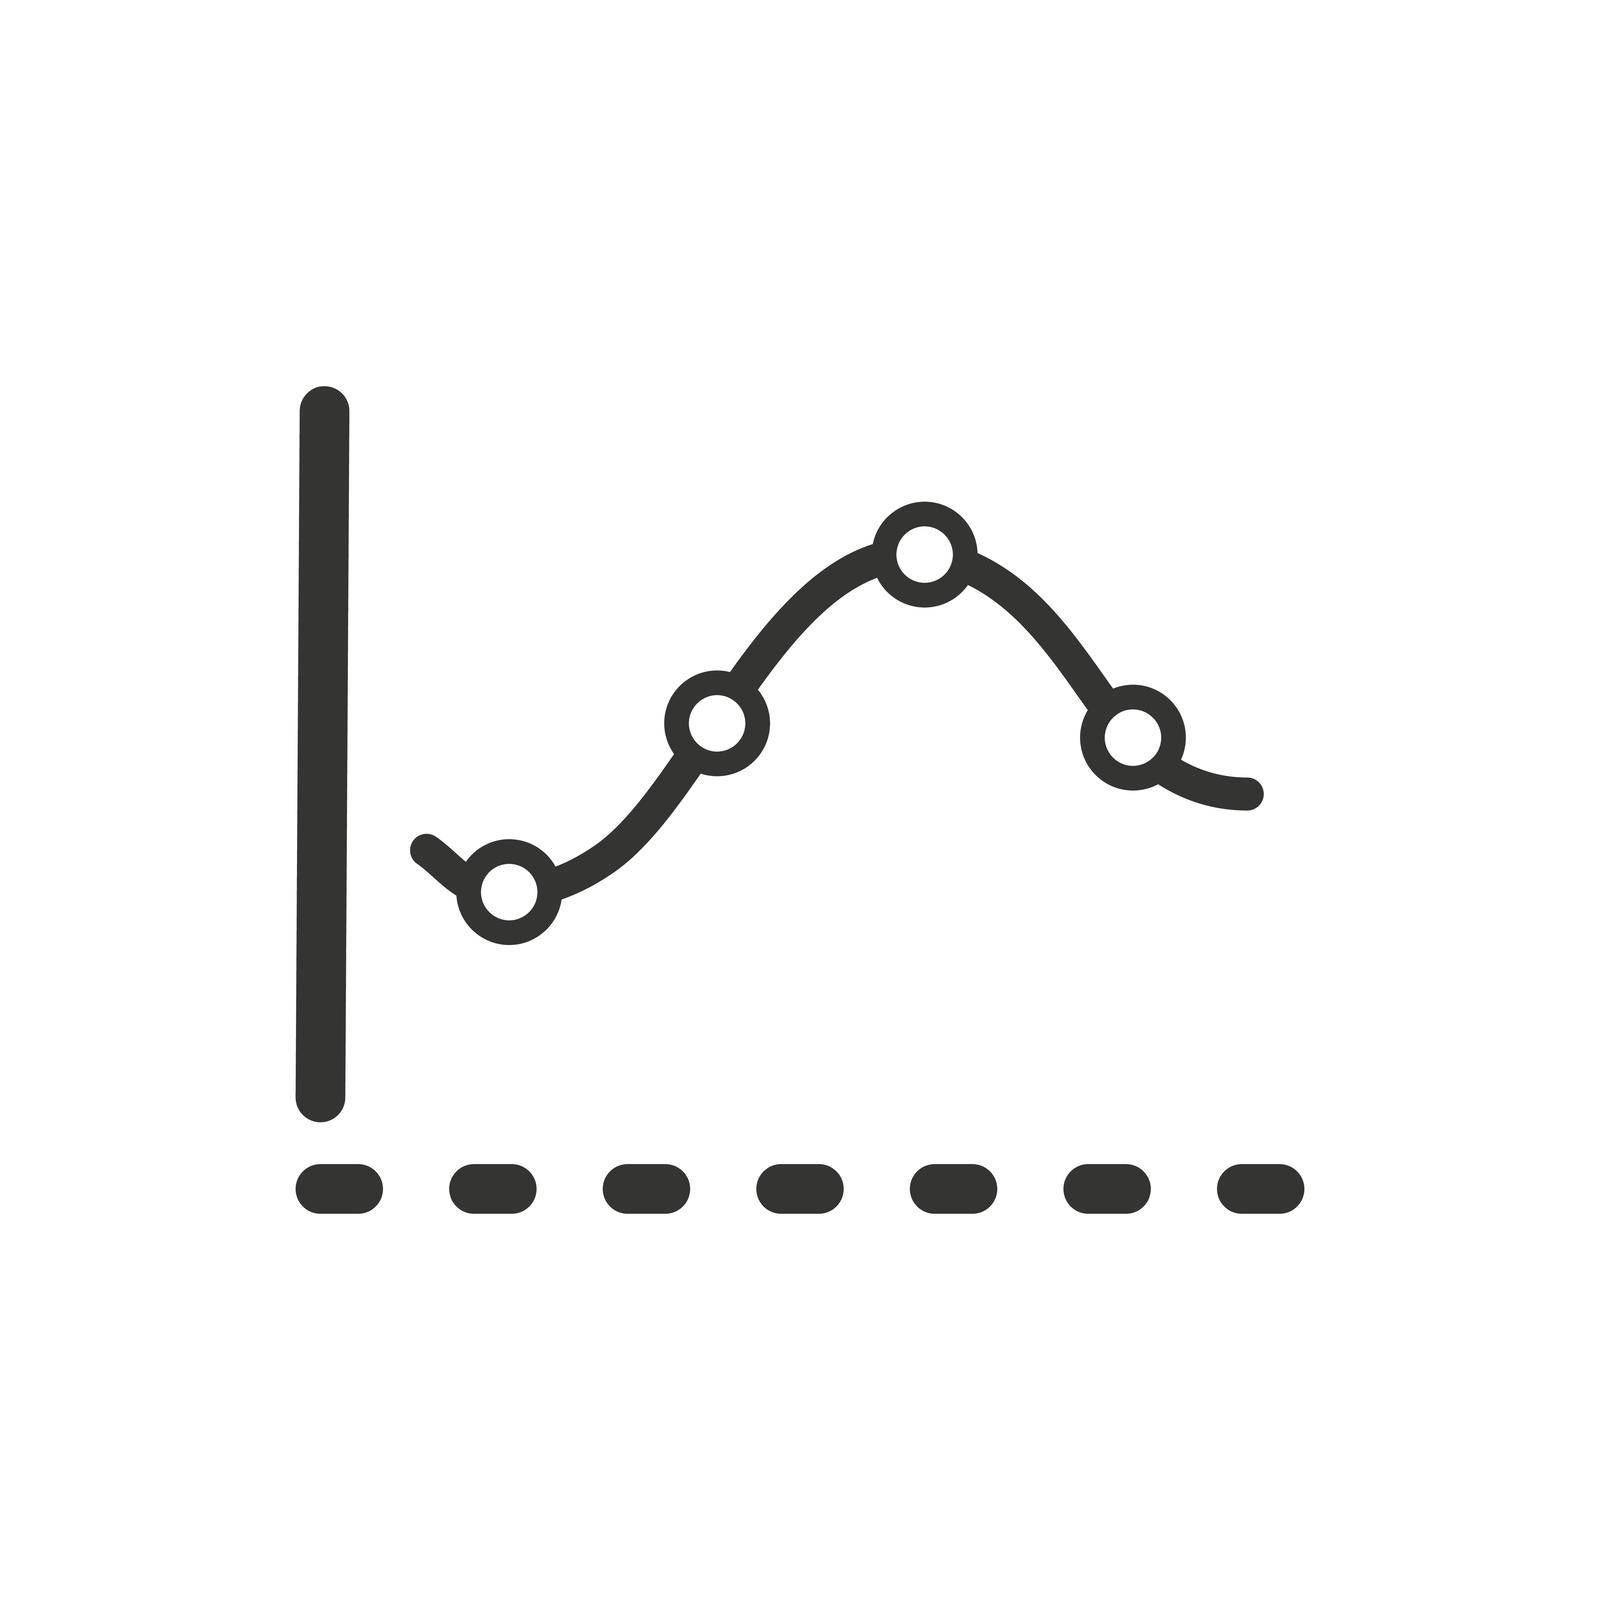 Business Analysis icon. Vector EPS file.